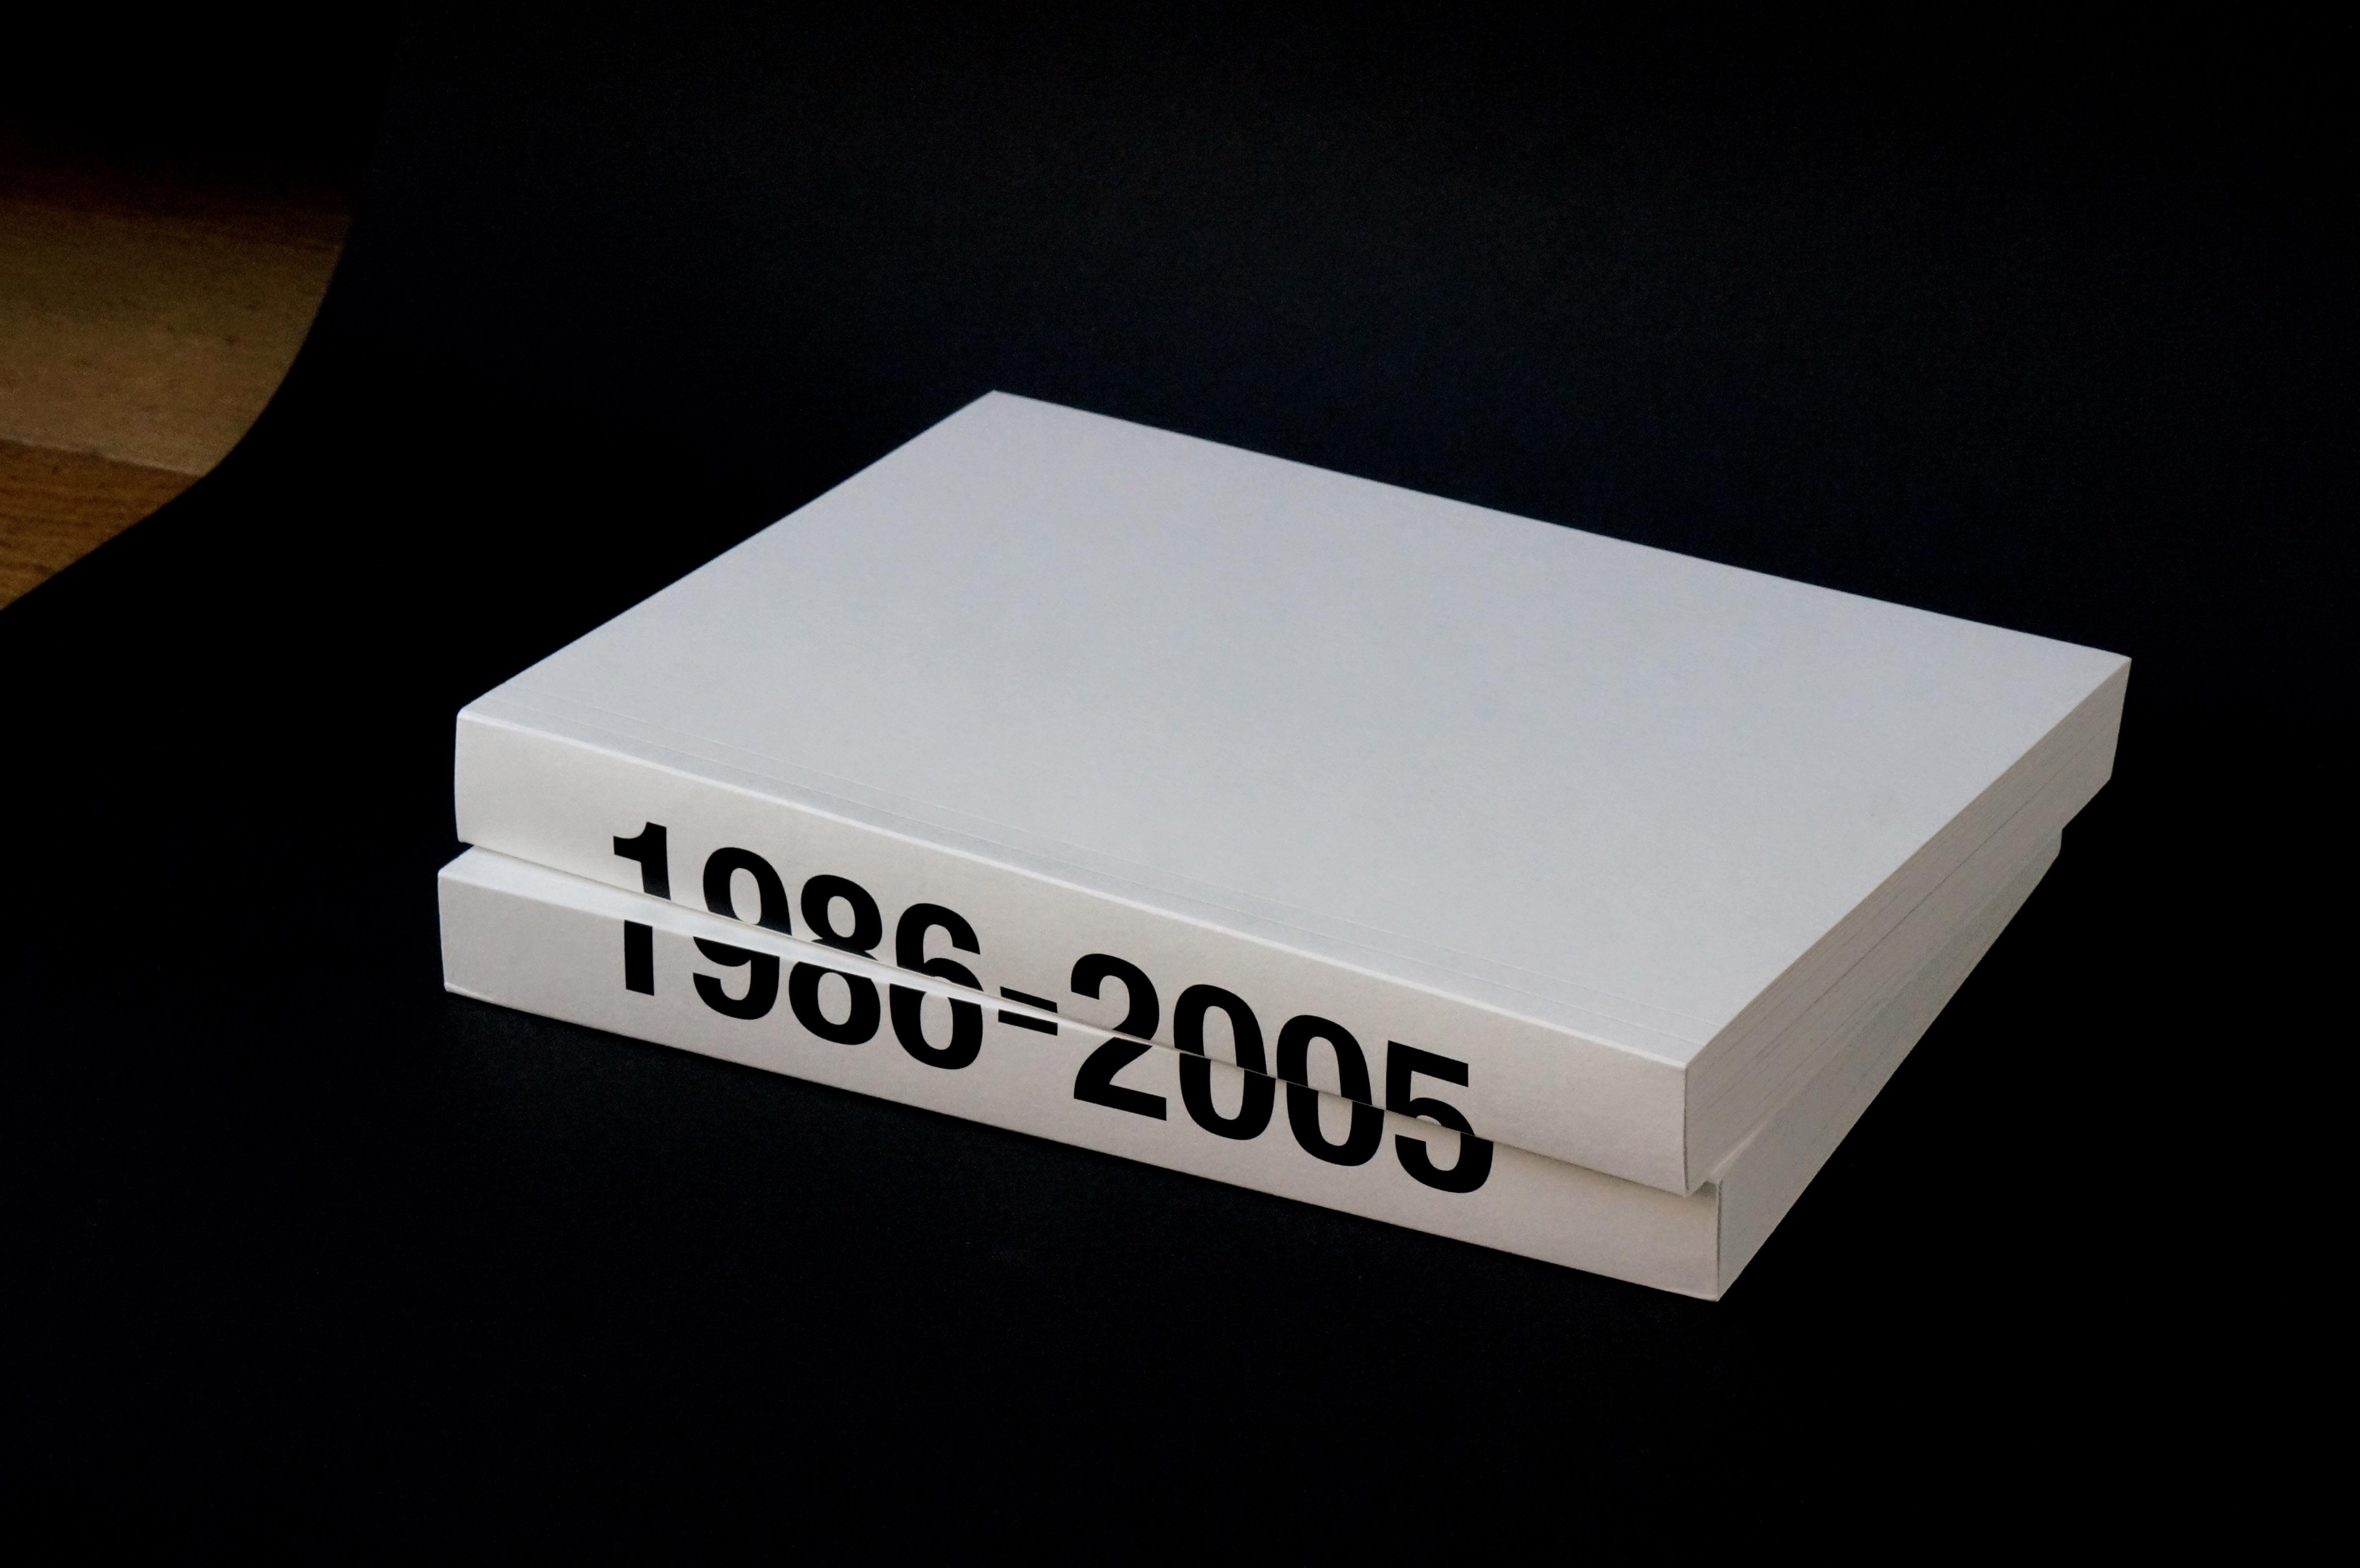 1986-2005 / Helmut Lang Archive Books, published by @printings.jp